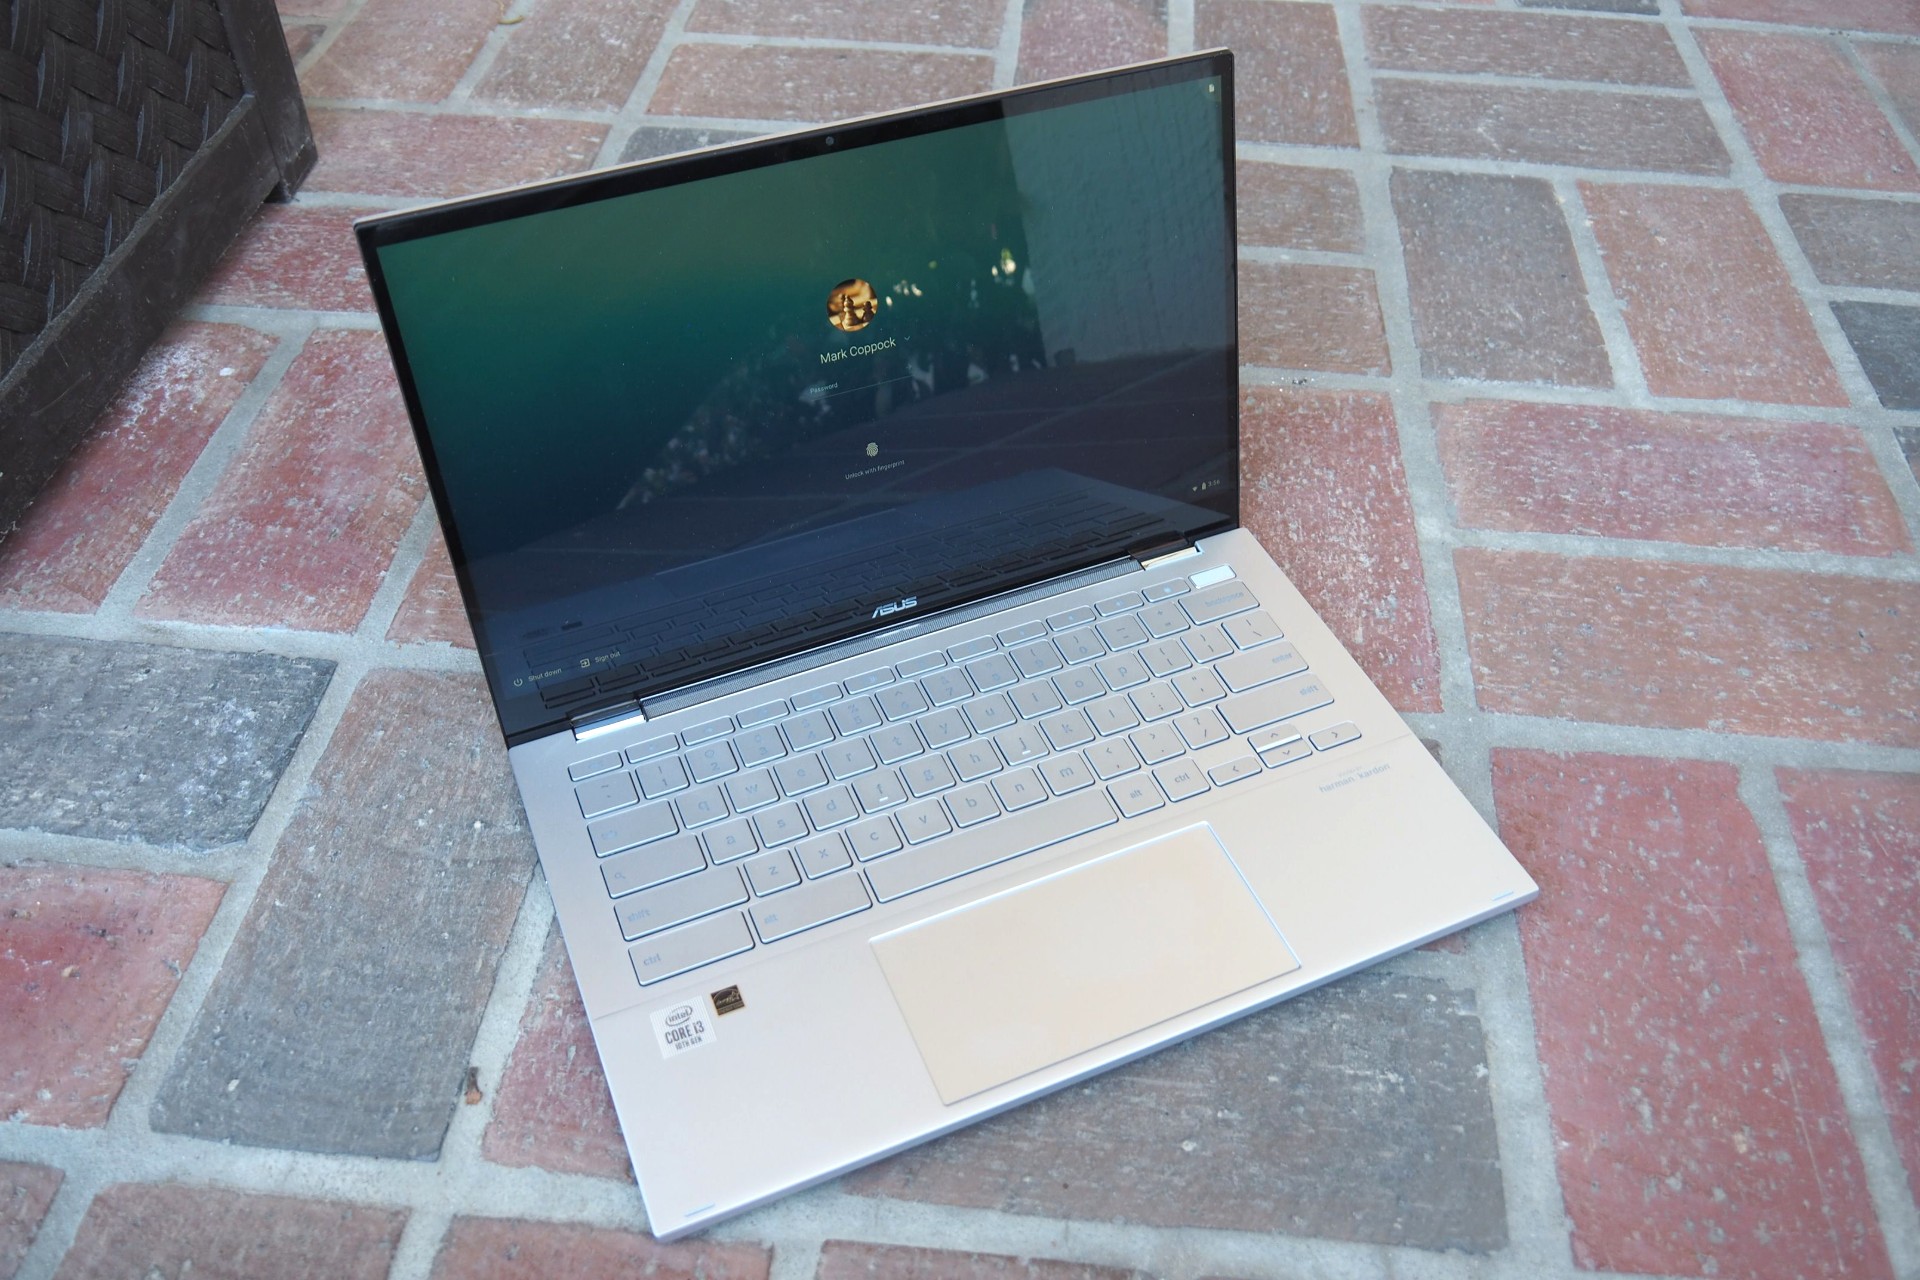 The Asus Chromebook Flip C436 open on a stone patio.